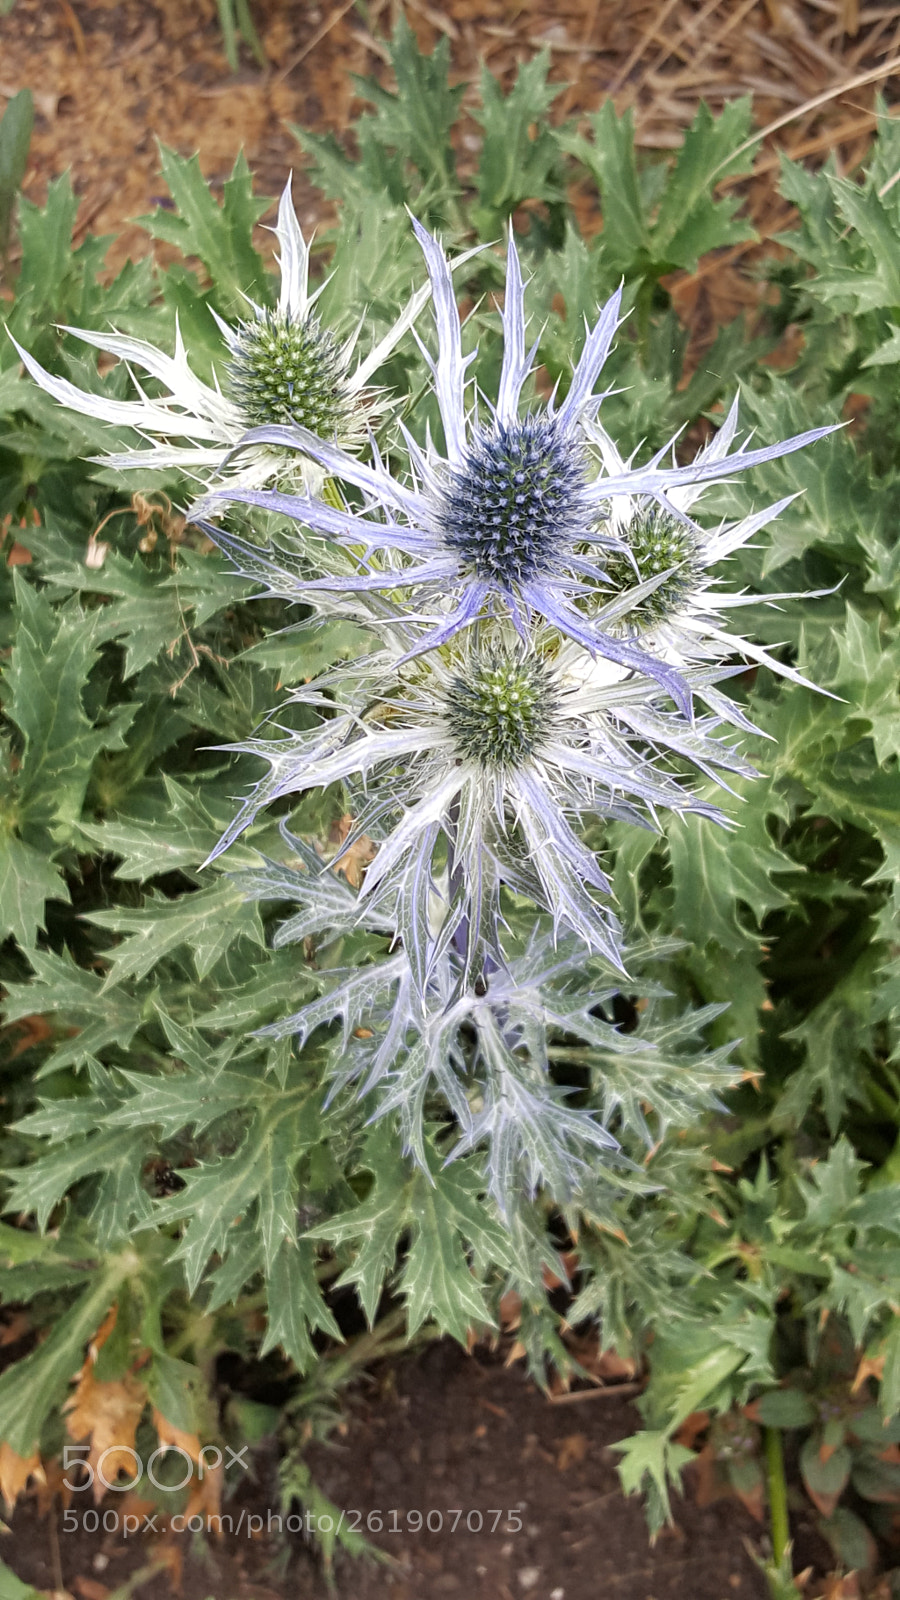 Samsung Galaxy S6 sample photo. A thistle i think! photography